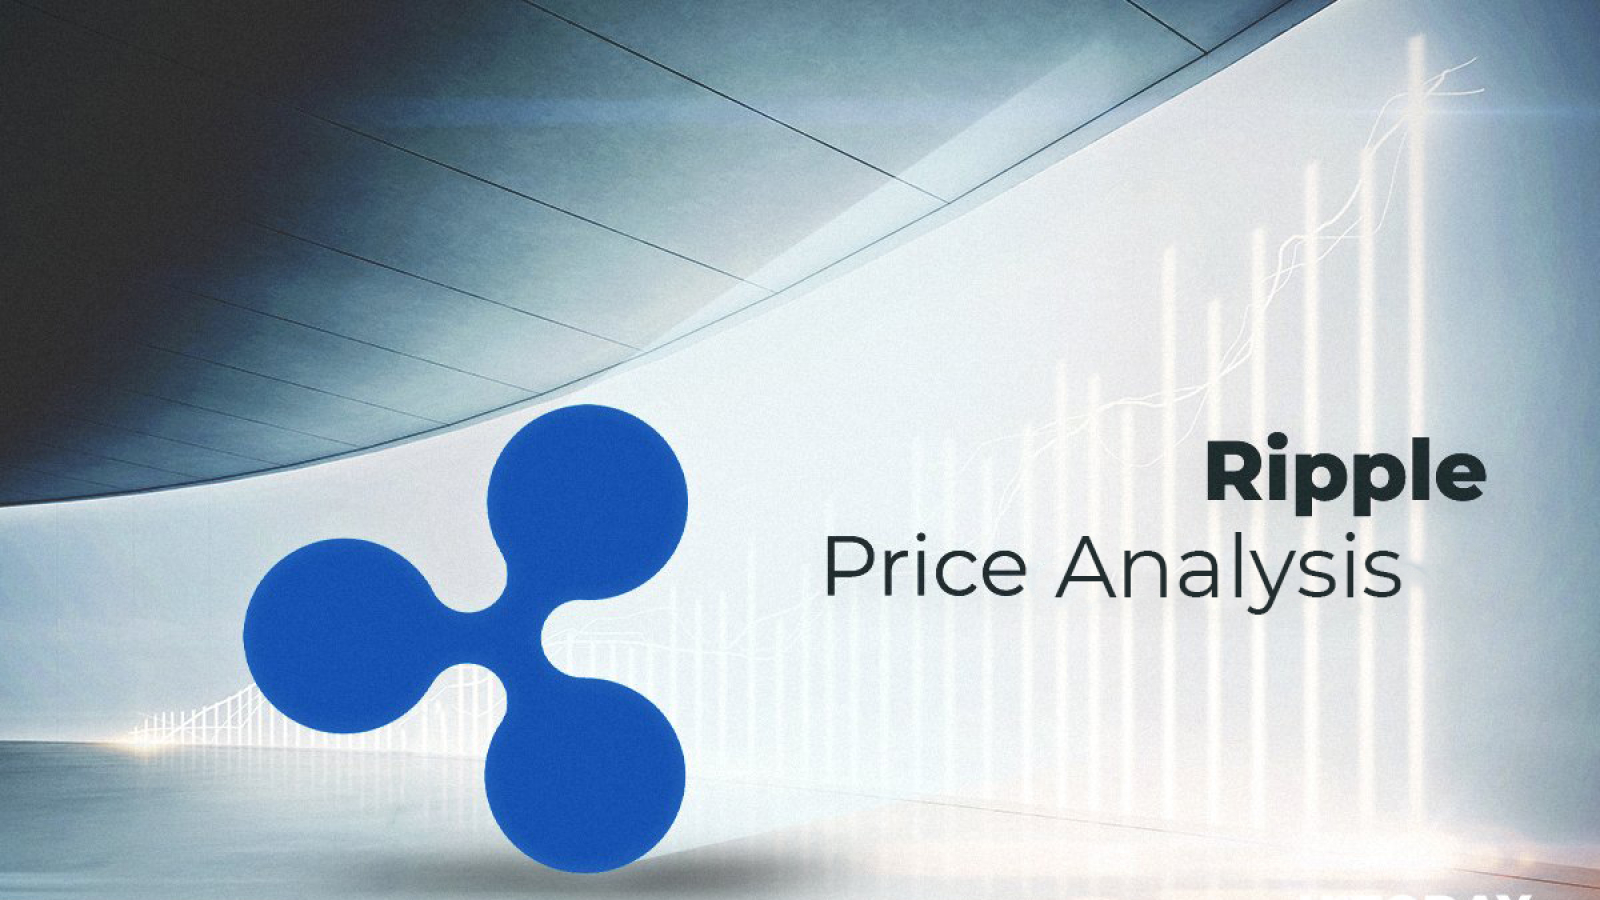 Ripple Price Analysis - How Much Might XRP Cost in 2018\2020?